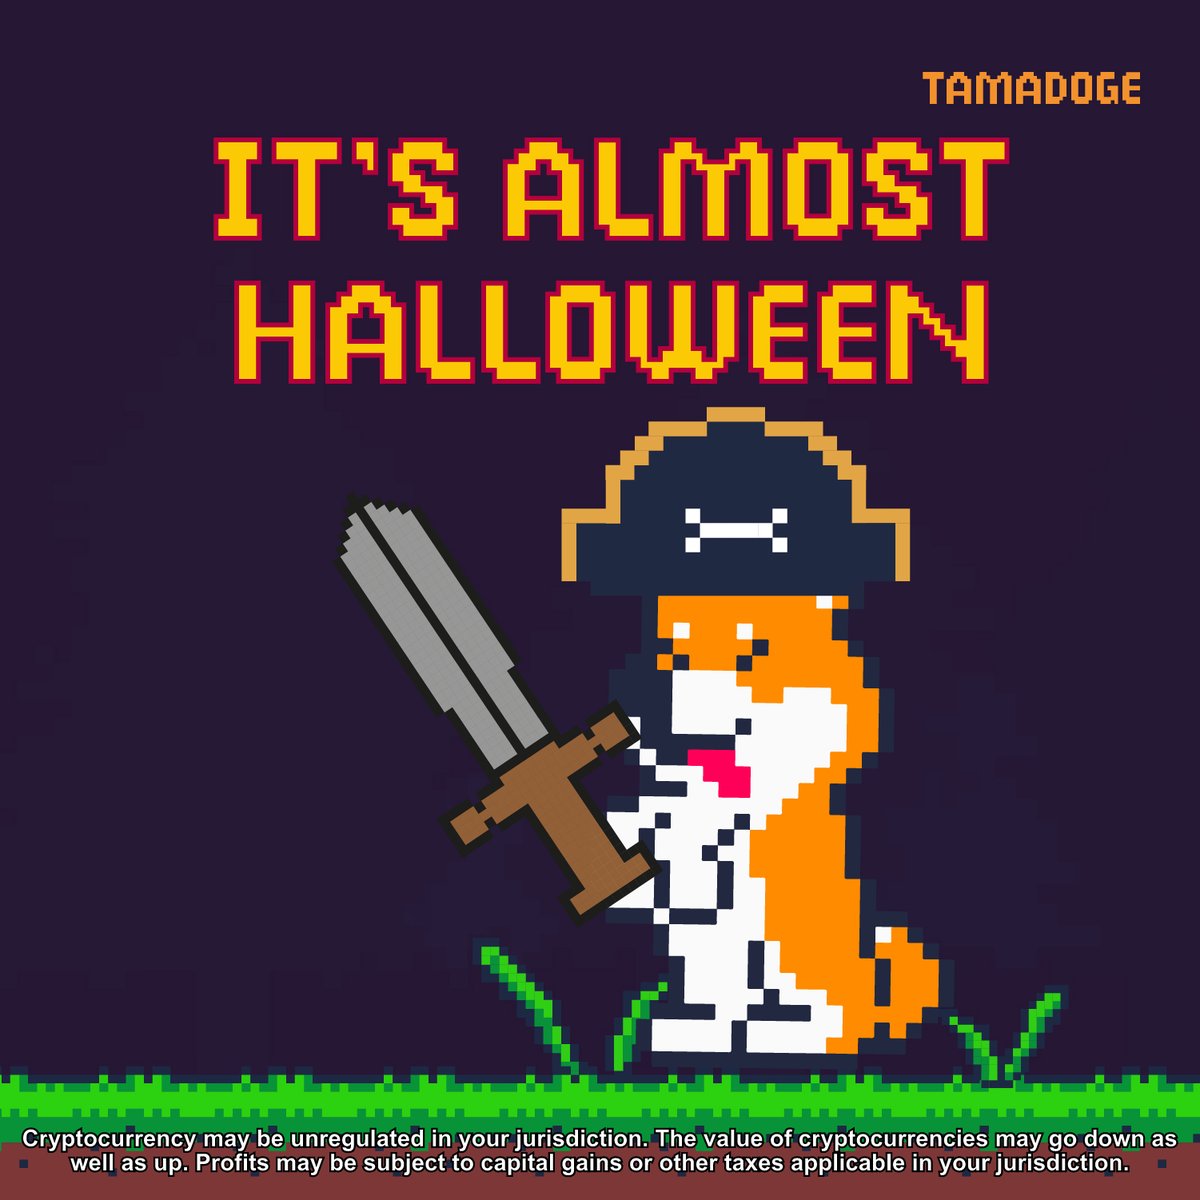 📣 Hey #TamadogeArmy! What Should #Tamadoge Dress Up As For Halloween?👀 Best Answer Wins $50 - Get Creative - Show Us Your Ideas Below 🔥⬇️